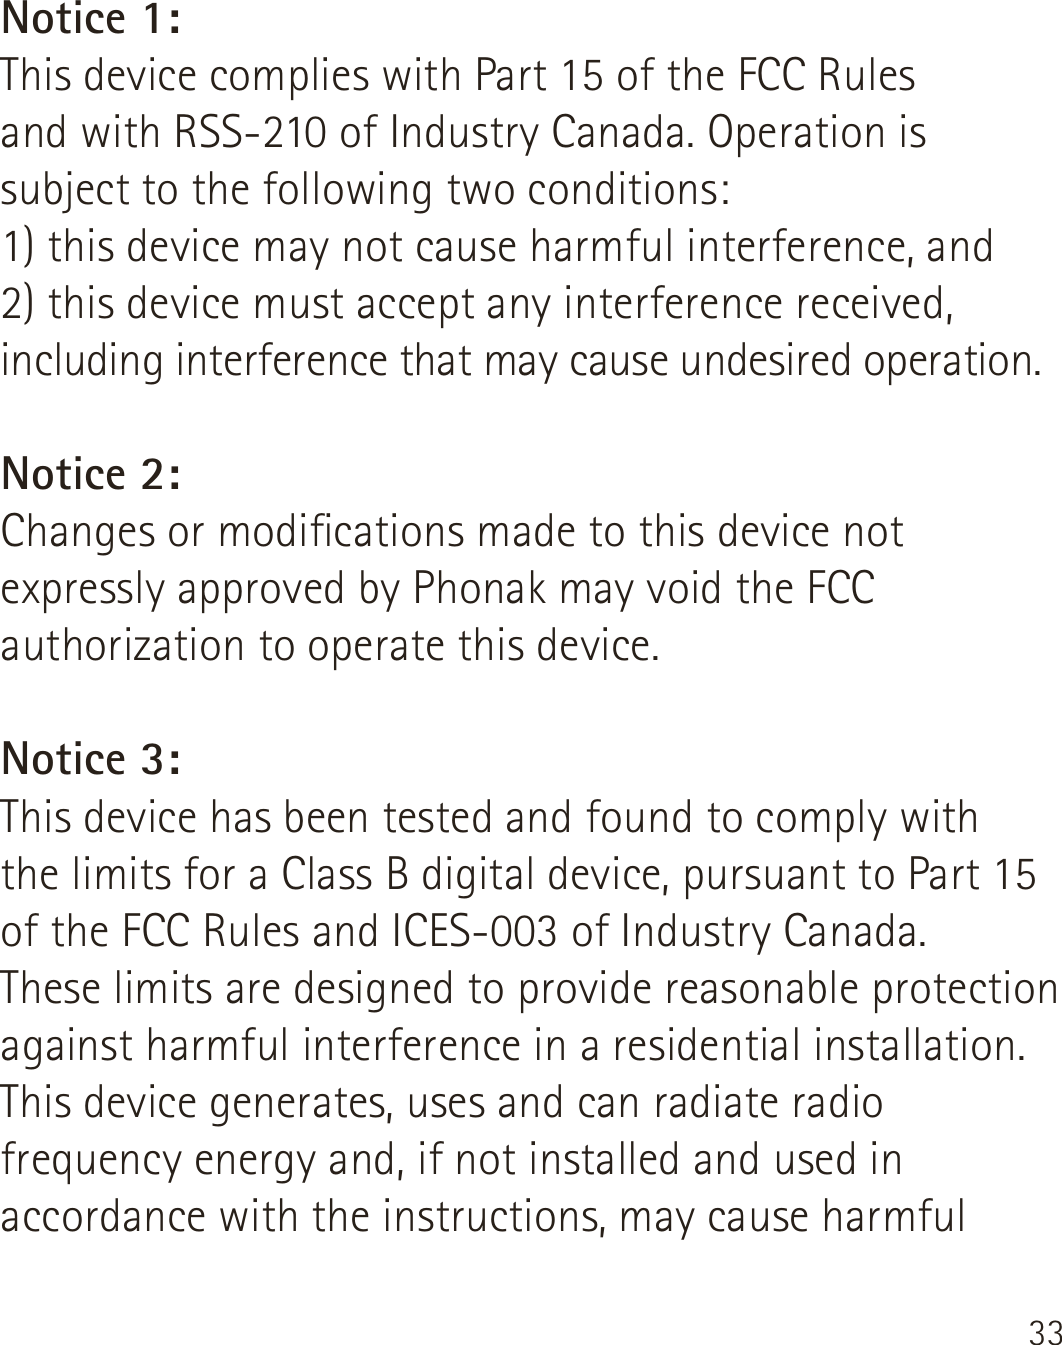 33Notice 1:This device complies with Part 15 of the FCC Rules  and with RSS-210 of Industry Canada. Operation is subject to the following two conditions:1) this device may not cause harmful interference, and2) this device must accept any interference received, including interference that may cause undesired operation.Notice 2:Changes or modications made to this device not expressly approved by Phonak may void the FCC authorization to operate this device.Notice 3:This device has been tested and found to comply with  the limits for a Class B digital device, pursuant to Part 15 of the FCC Rules and ICES-003 of Industry Canada.These limits are designed to provide reasonable protection against harmful interference in a residential installation. This device generates, uses and can radiate radio frequency energy and, if not installed and used in accordance with the instructions, may cause harmful 